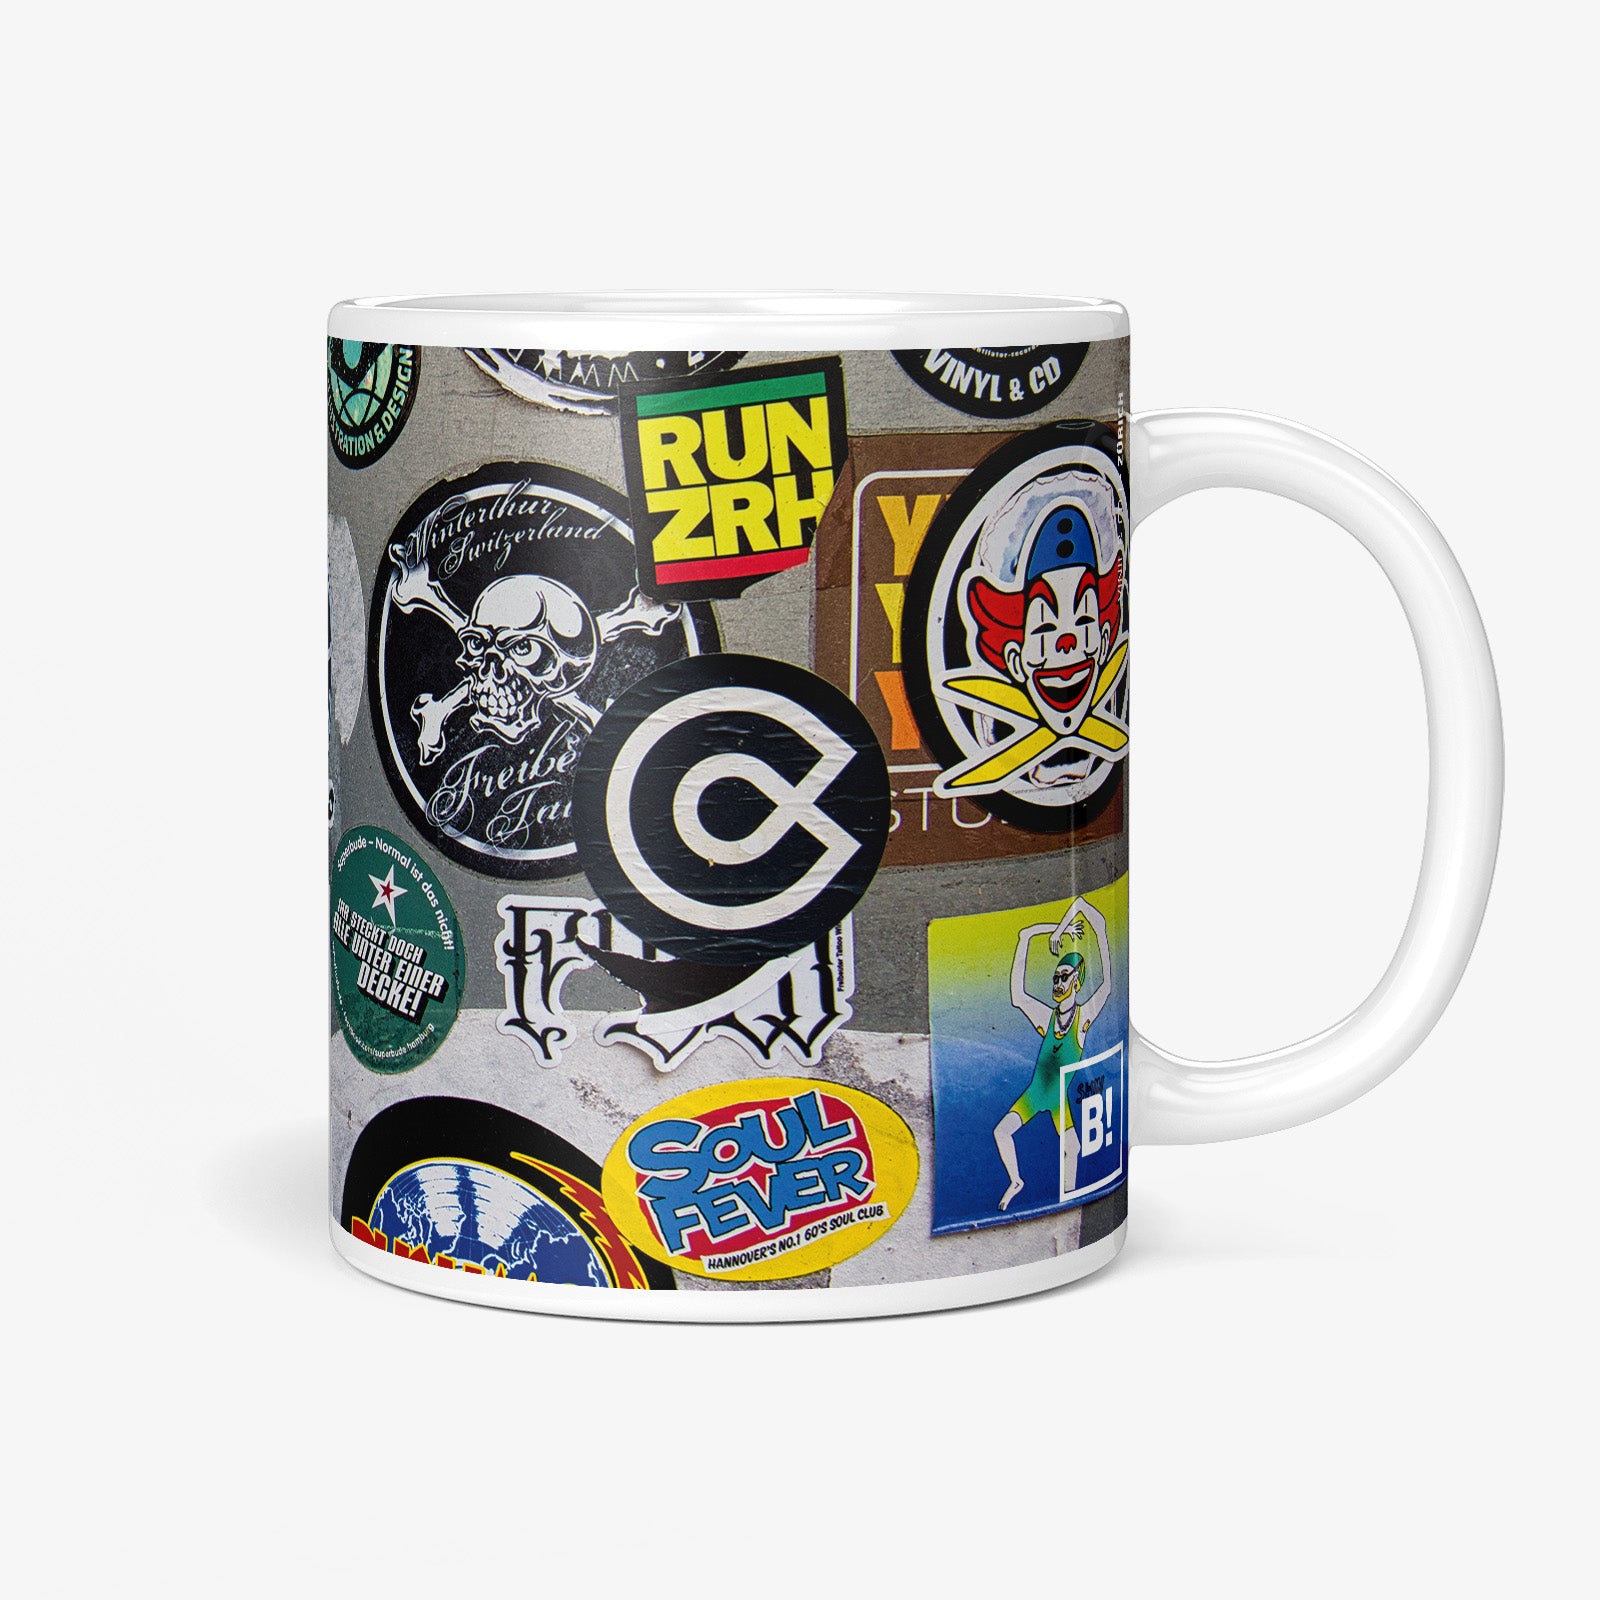 Be inspired by our Urban Art Coffee Mug "Vinyl & CD - No1" from Zurich. This mug features an 11oz size with the handle on the right.